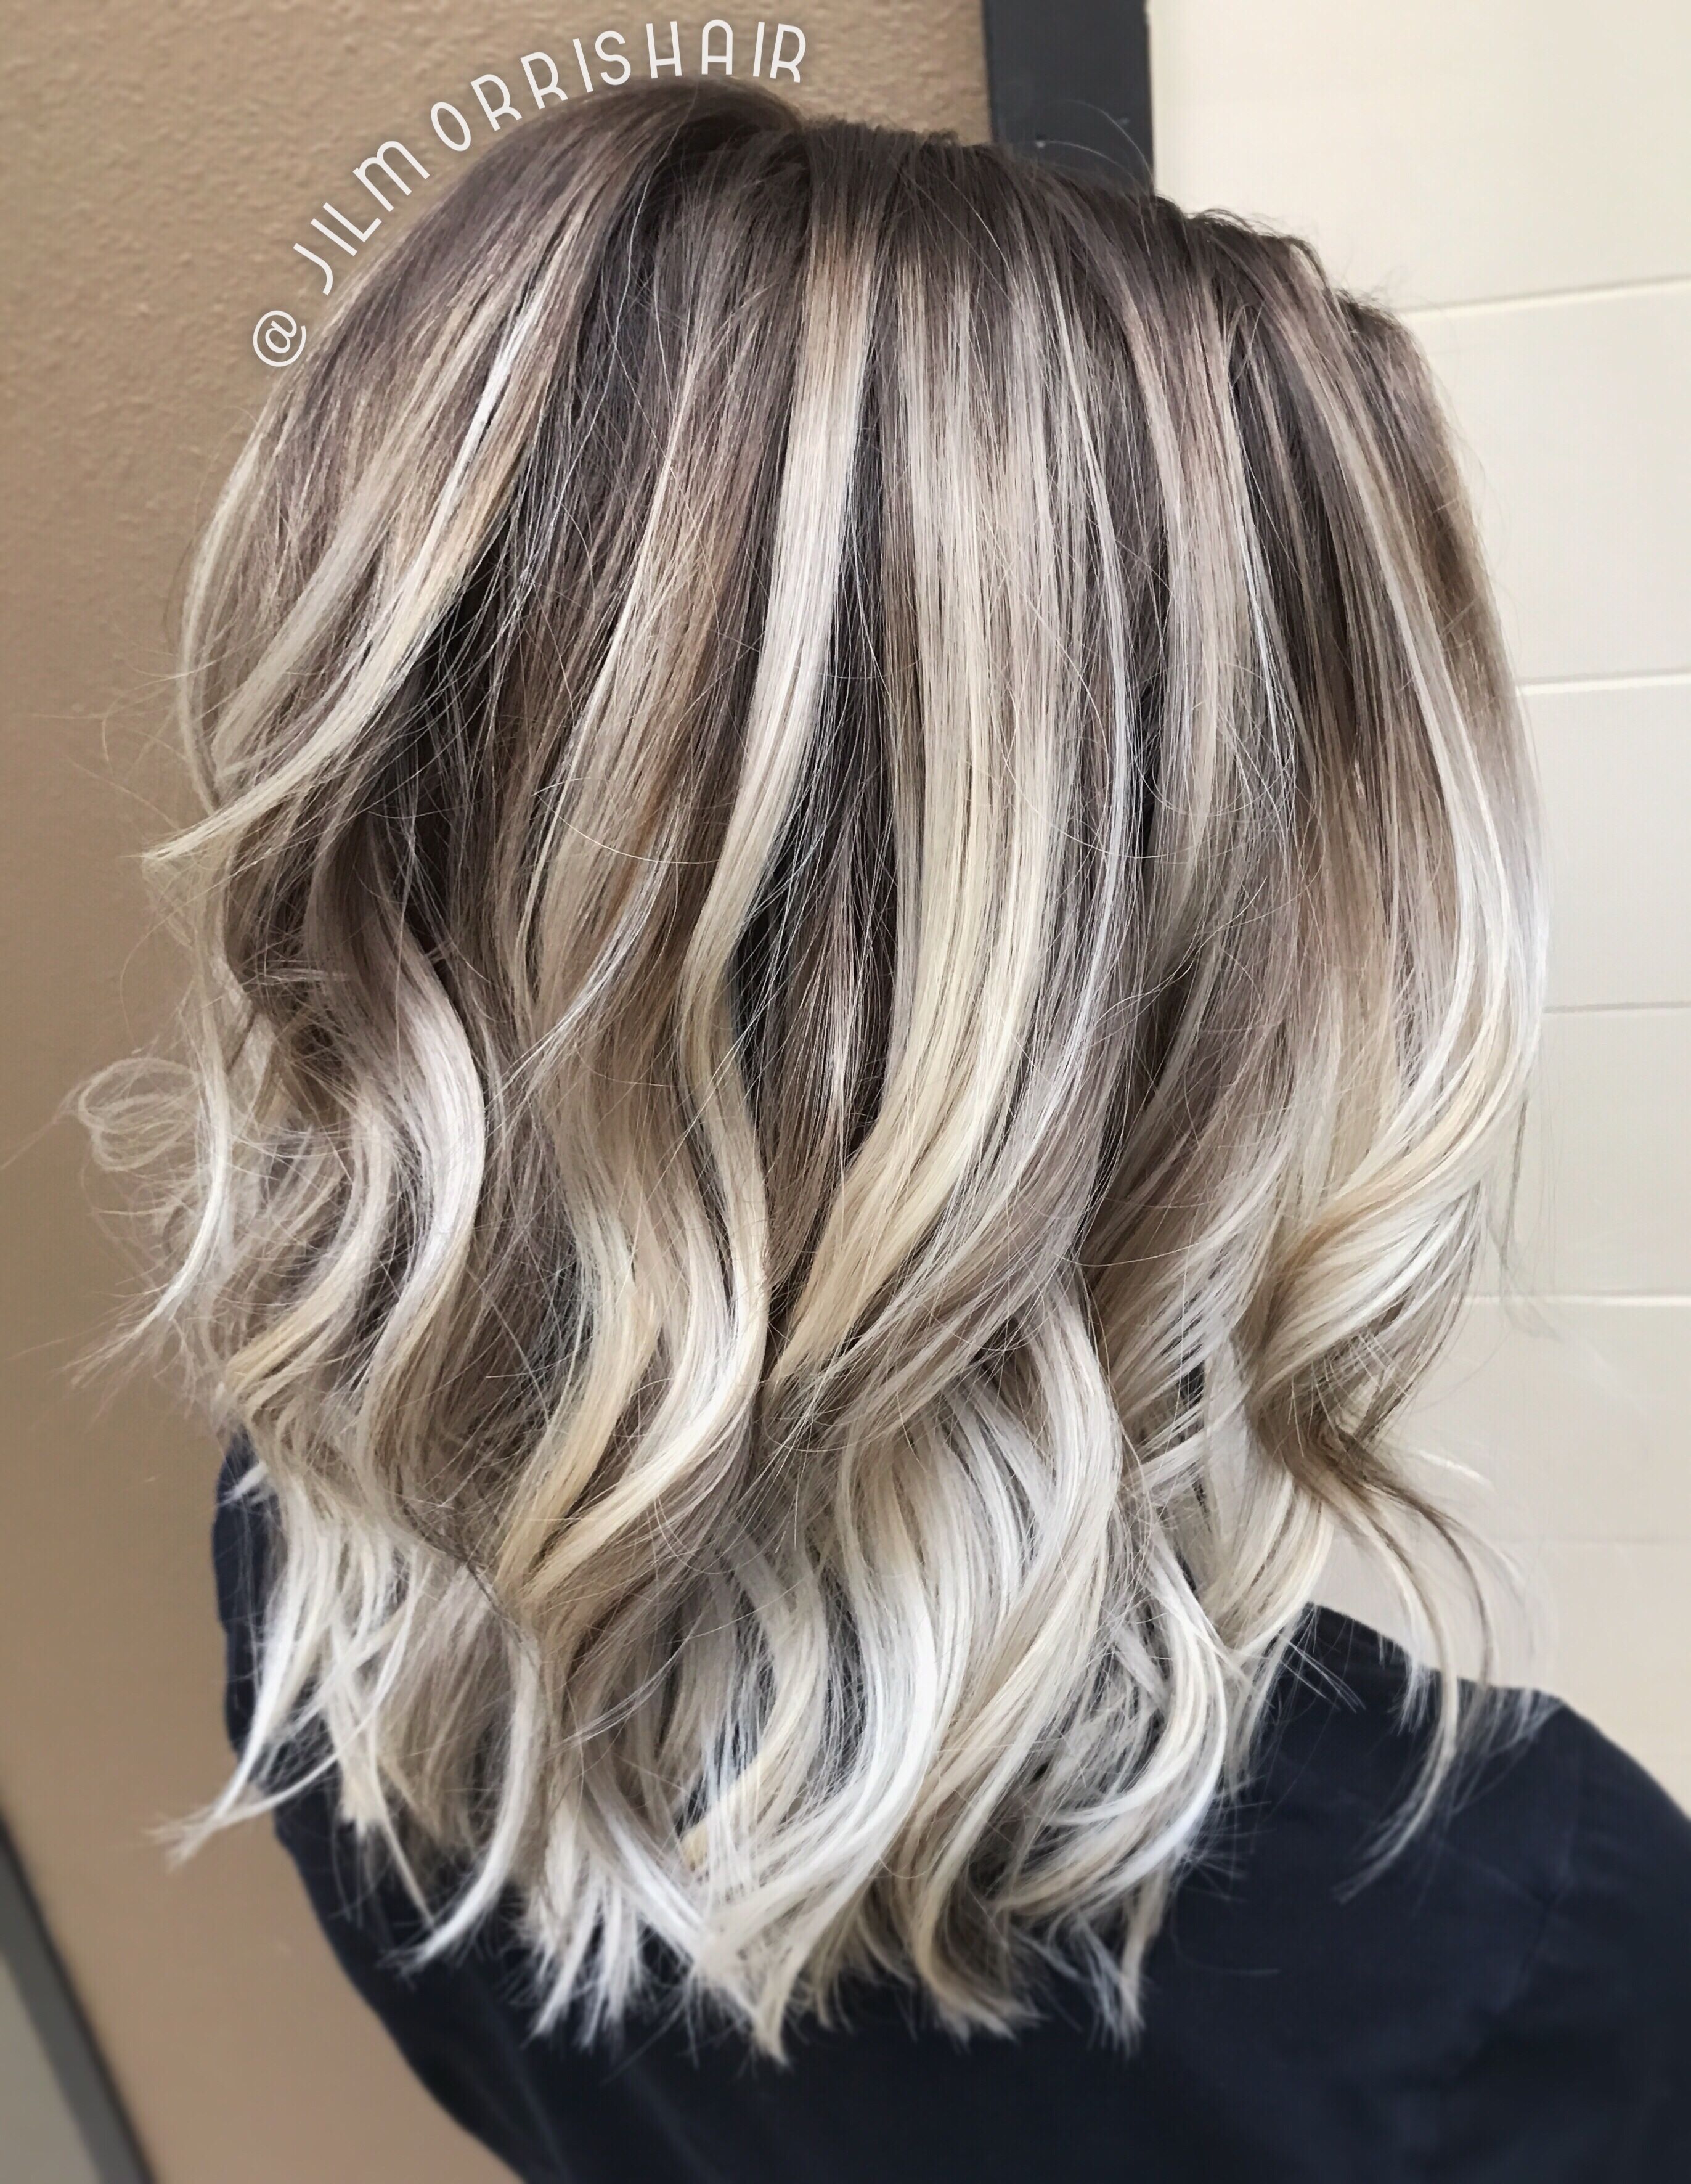 Cool icy ashy blonde balayage highlights, shadow root, waves and curls, blonde hair